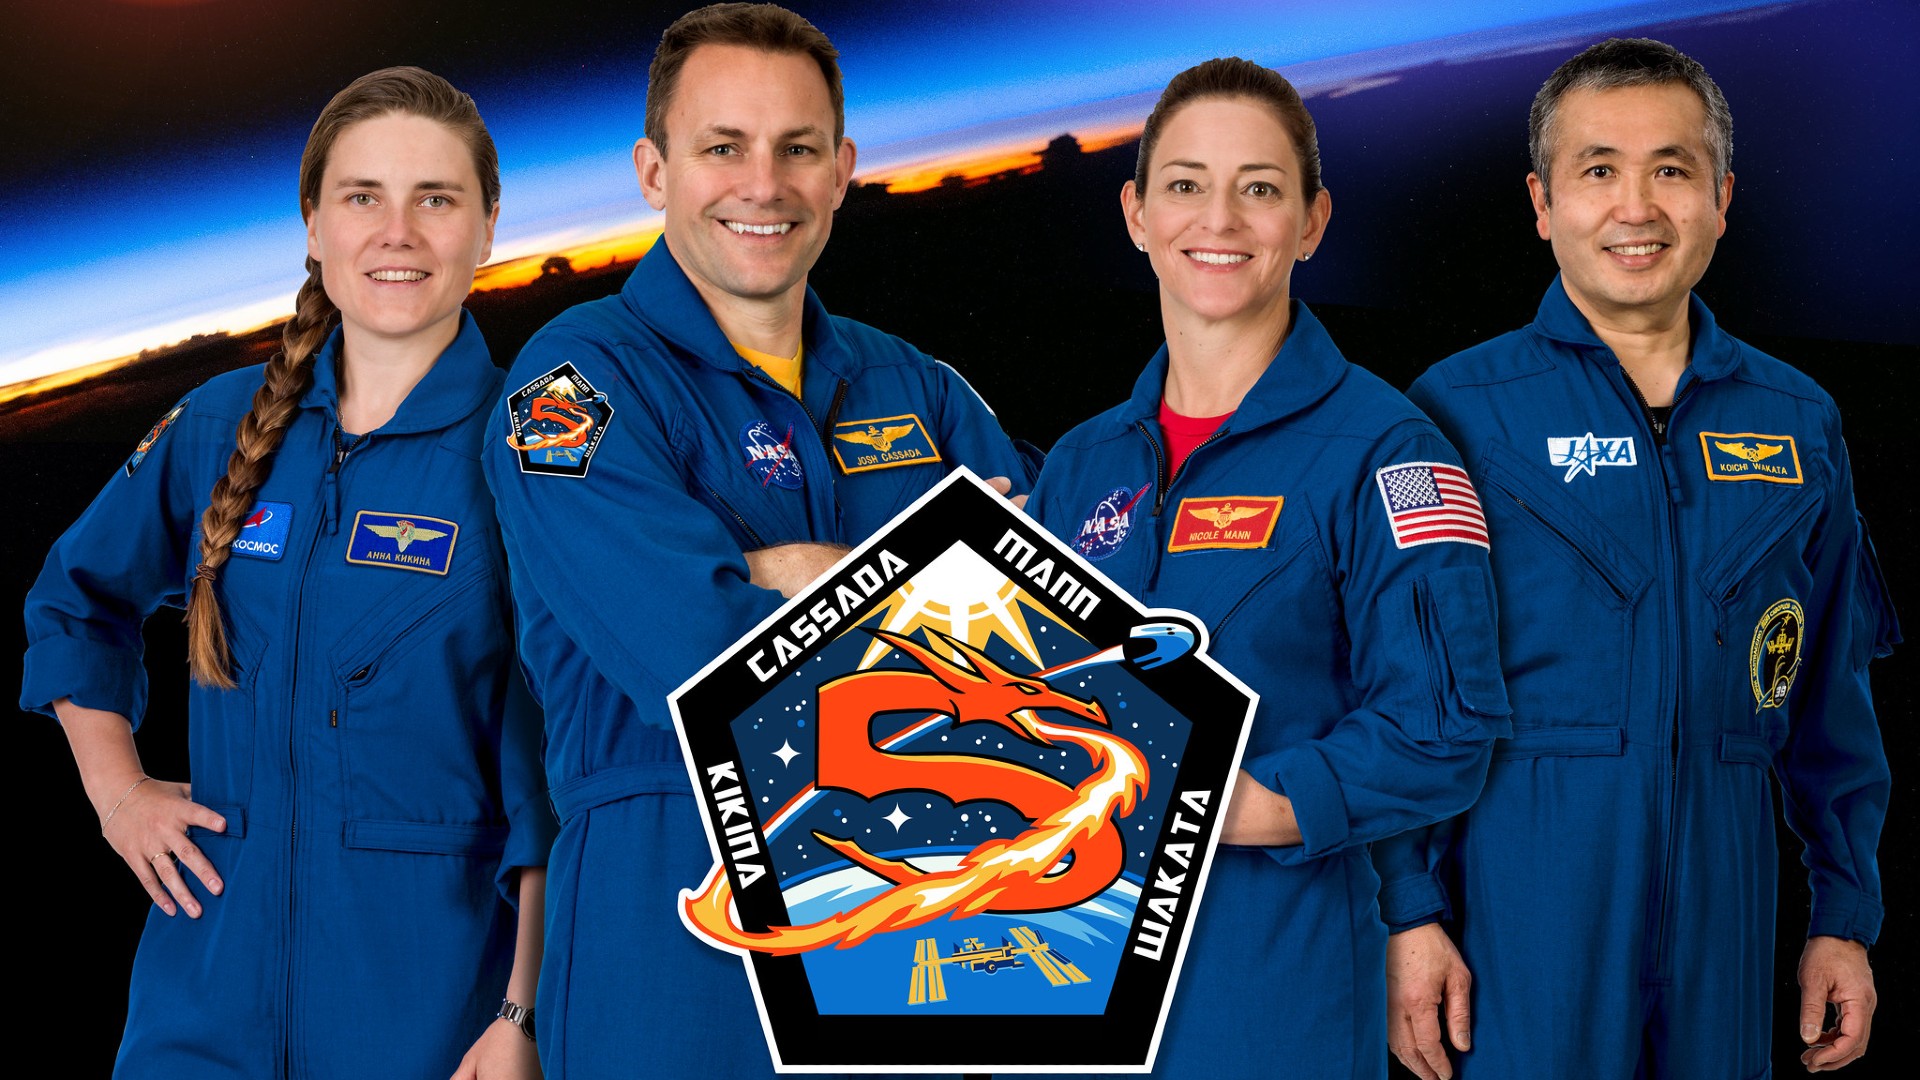 The official crew portrait for SpaceX's Crew-5 mission. From left are Anna Kikina, mission specialist; Josh Cassada, pilot; Nicole Mann, spacecraft commander; and Koichi Wakata, mission specialist.